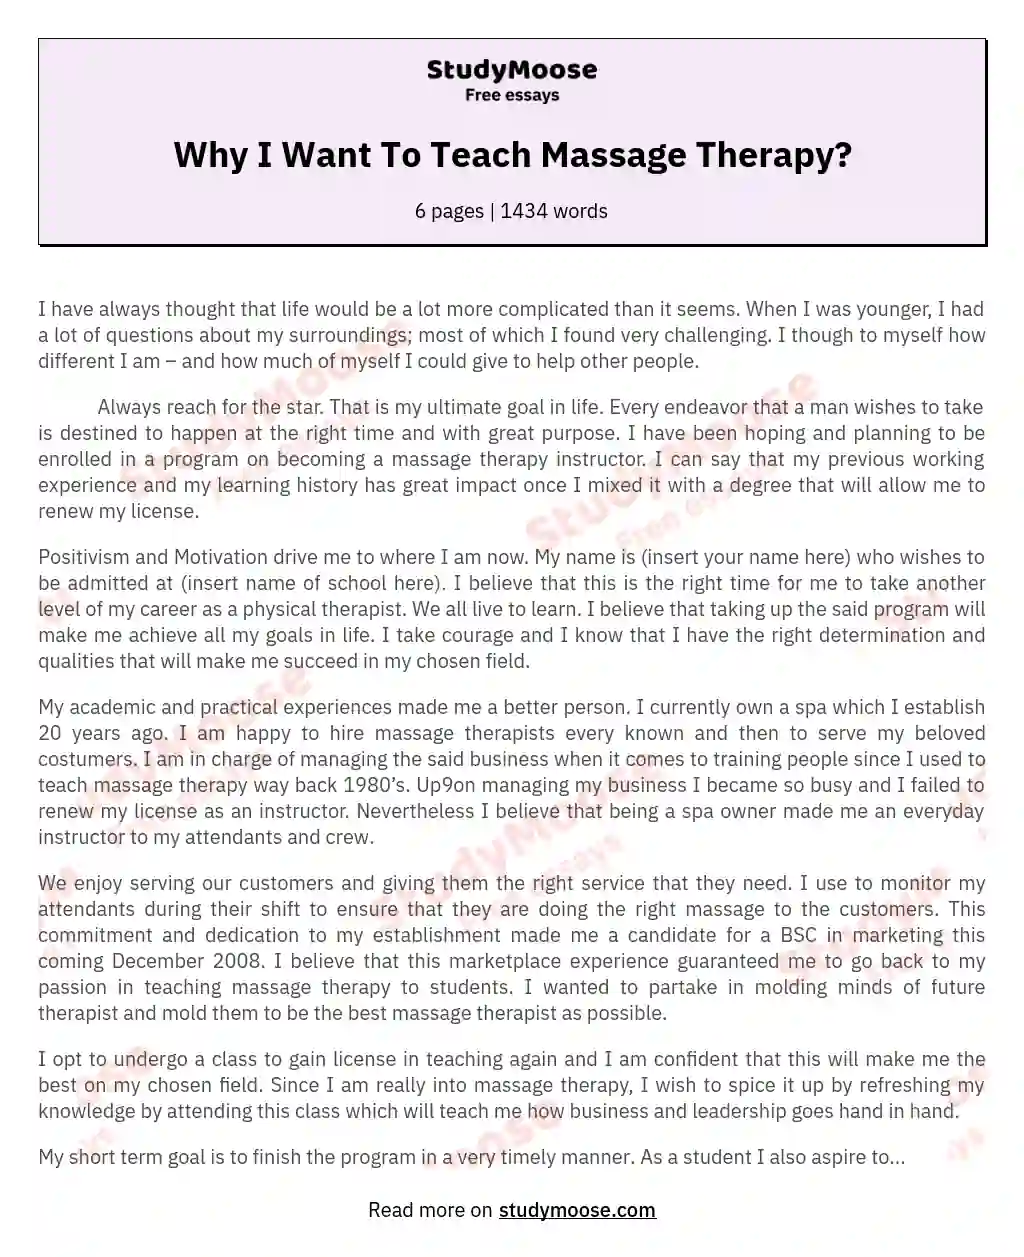 Why I Want To Teach Massage Therapy? essay